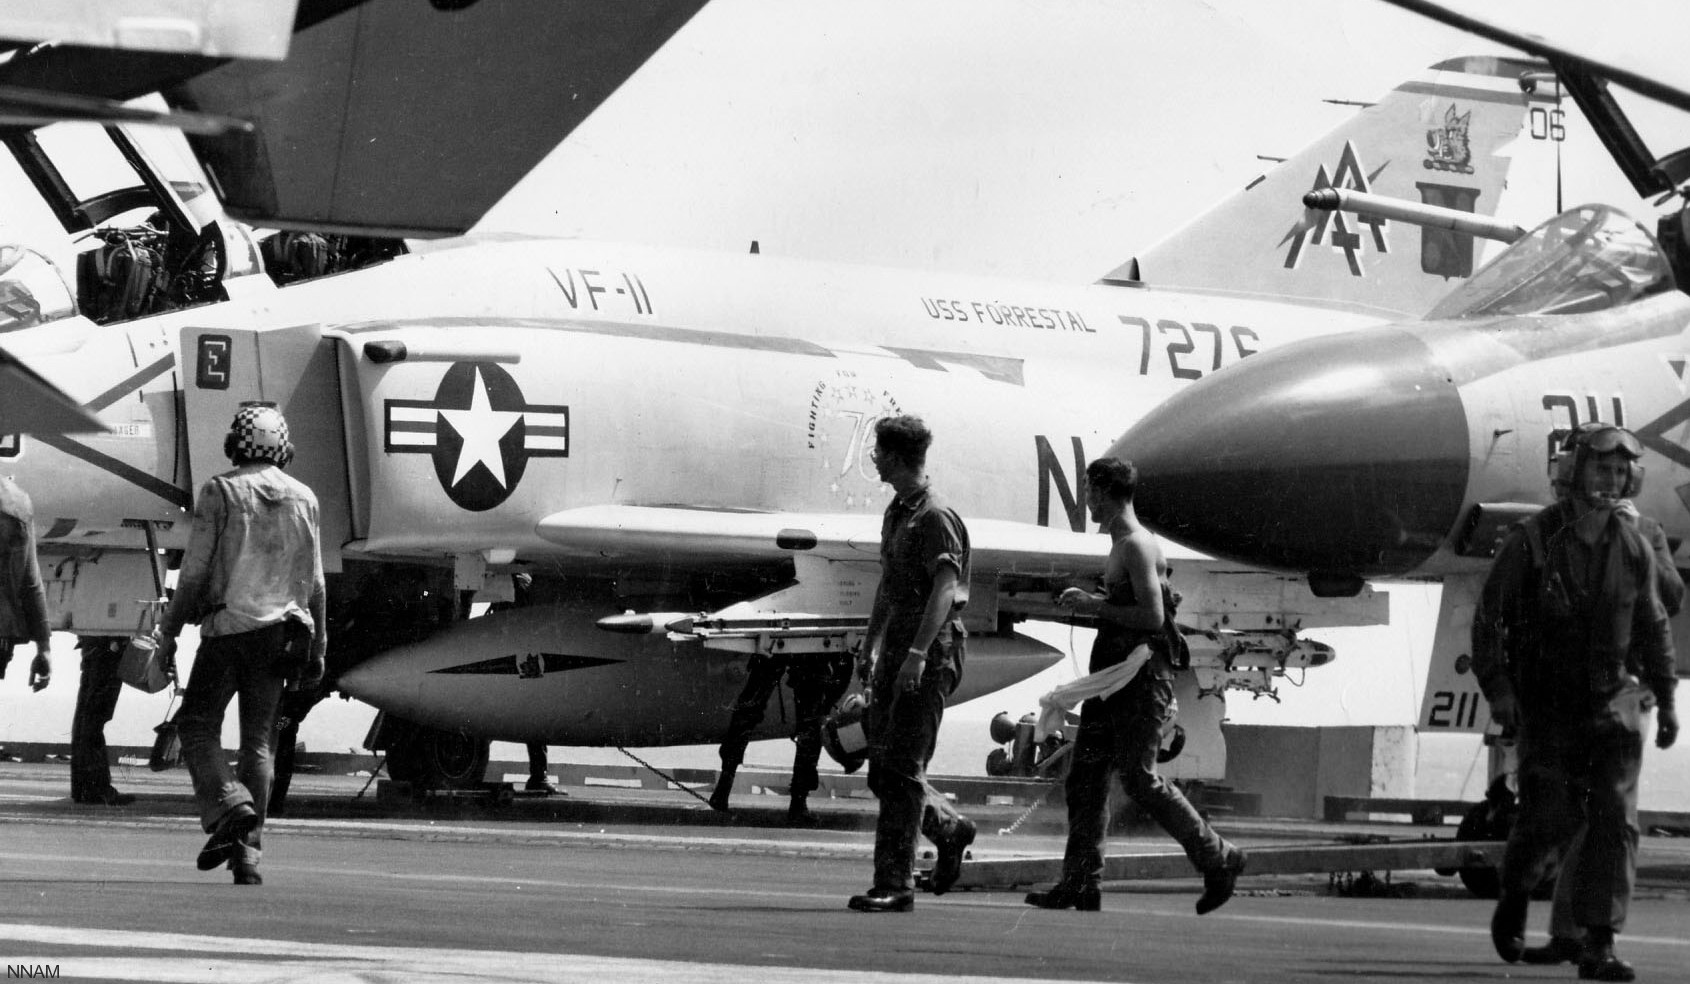 vf-11 red rippers fighter squadron us navy fitron f-4j phantom ii carrier air wing cvw-17 uss forrestal cv-59 22